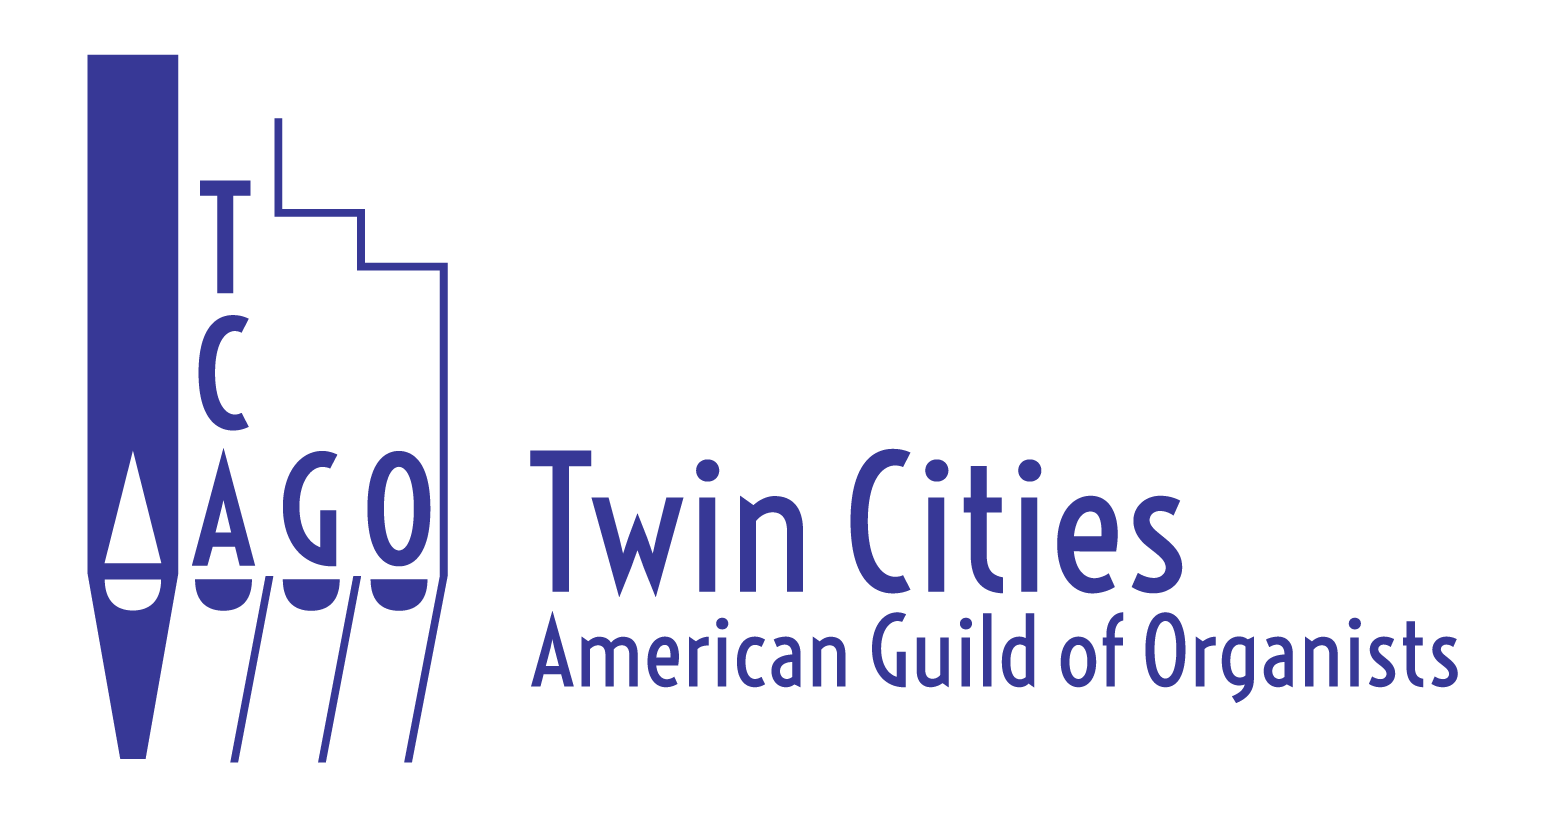 Twin Cities American Guild of Organists